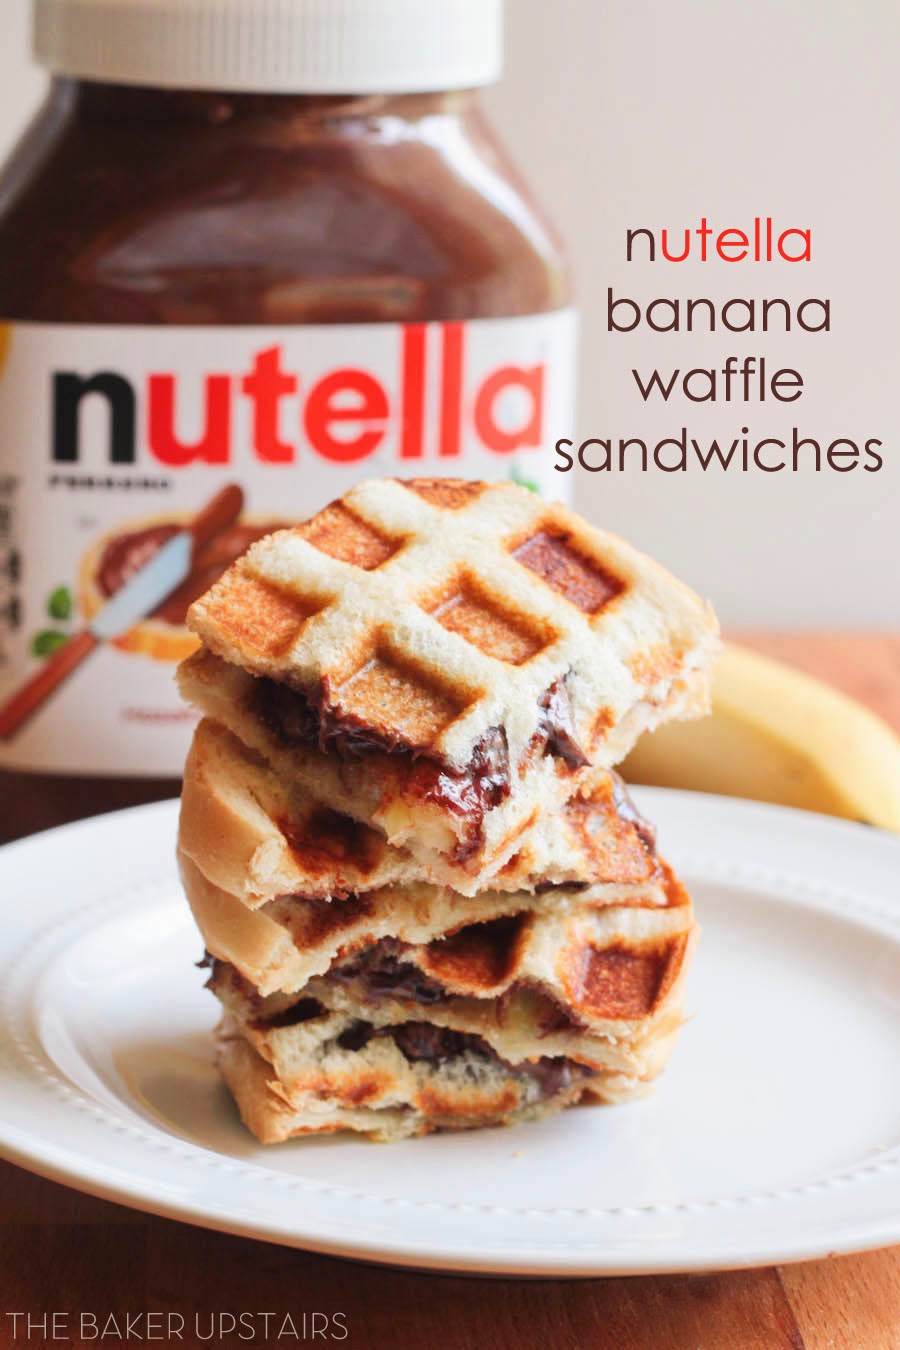 10 Delicious Waffle Recipes - These waffles are delicious and perfect for breakfast, and easy to make!